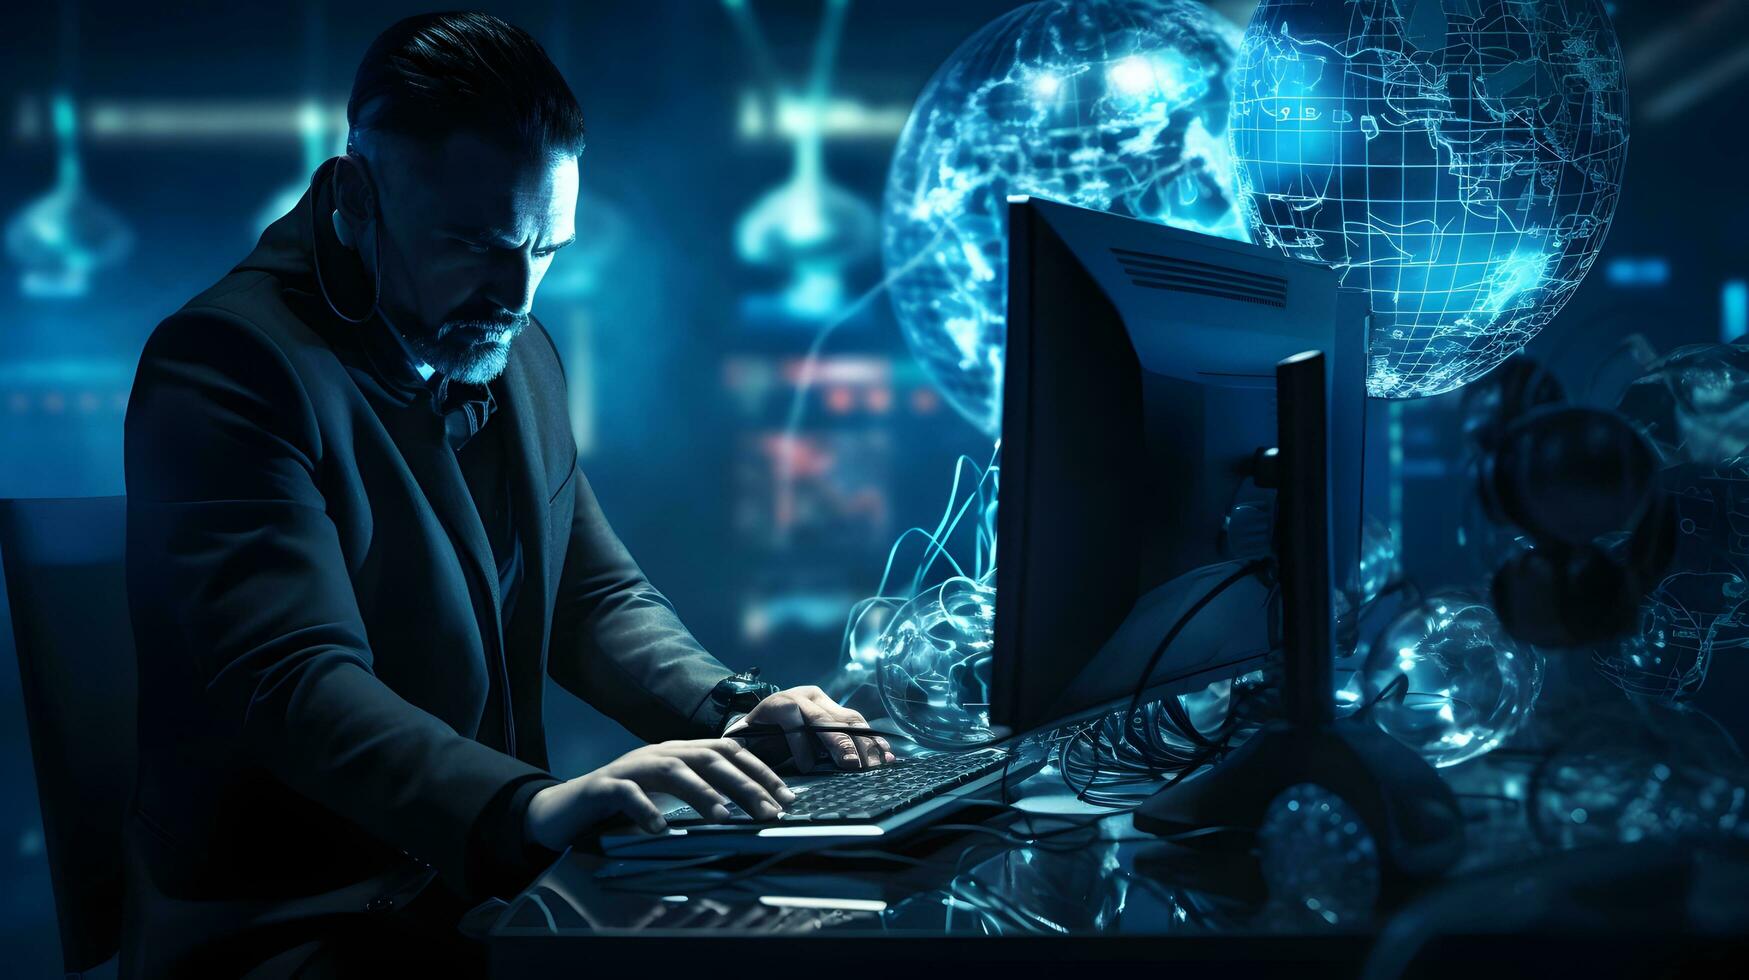 security analyst trying fighting cyber crime. Cyber hacker with computer. photo